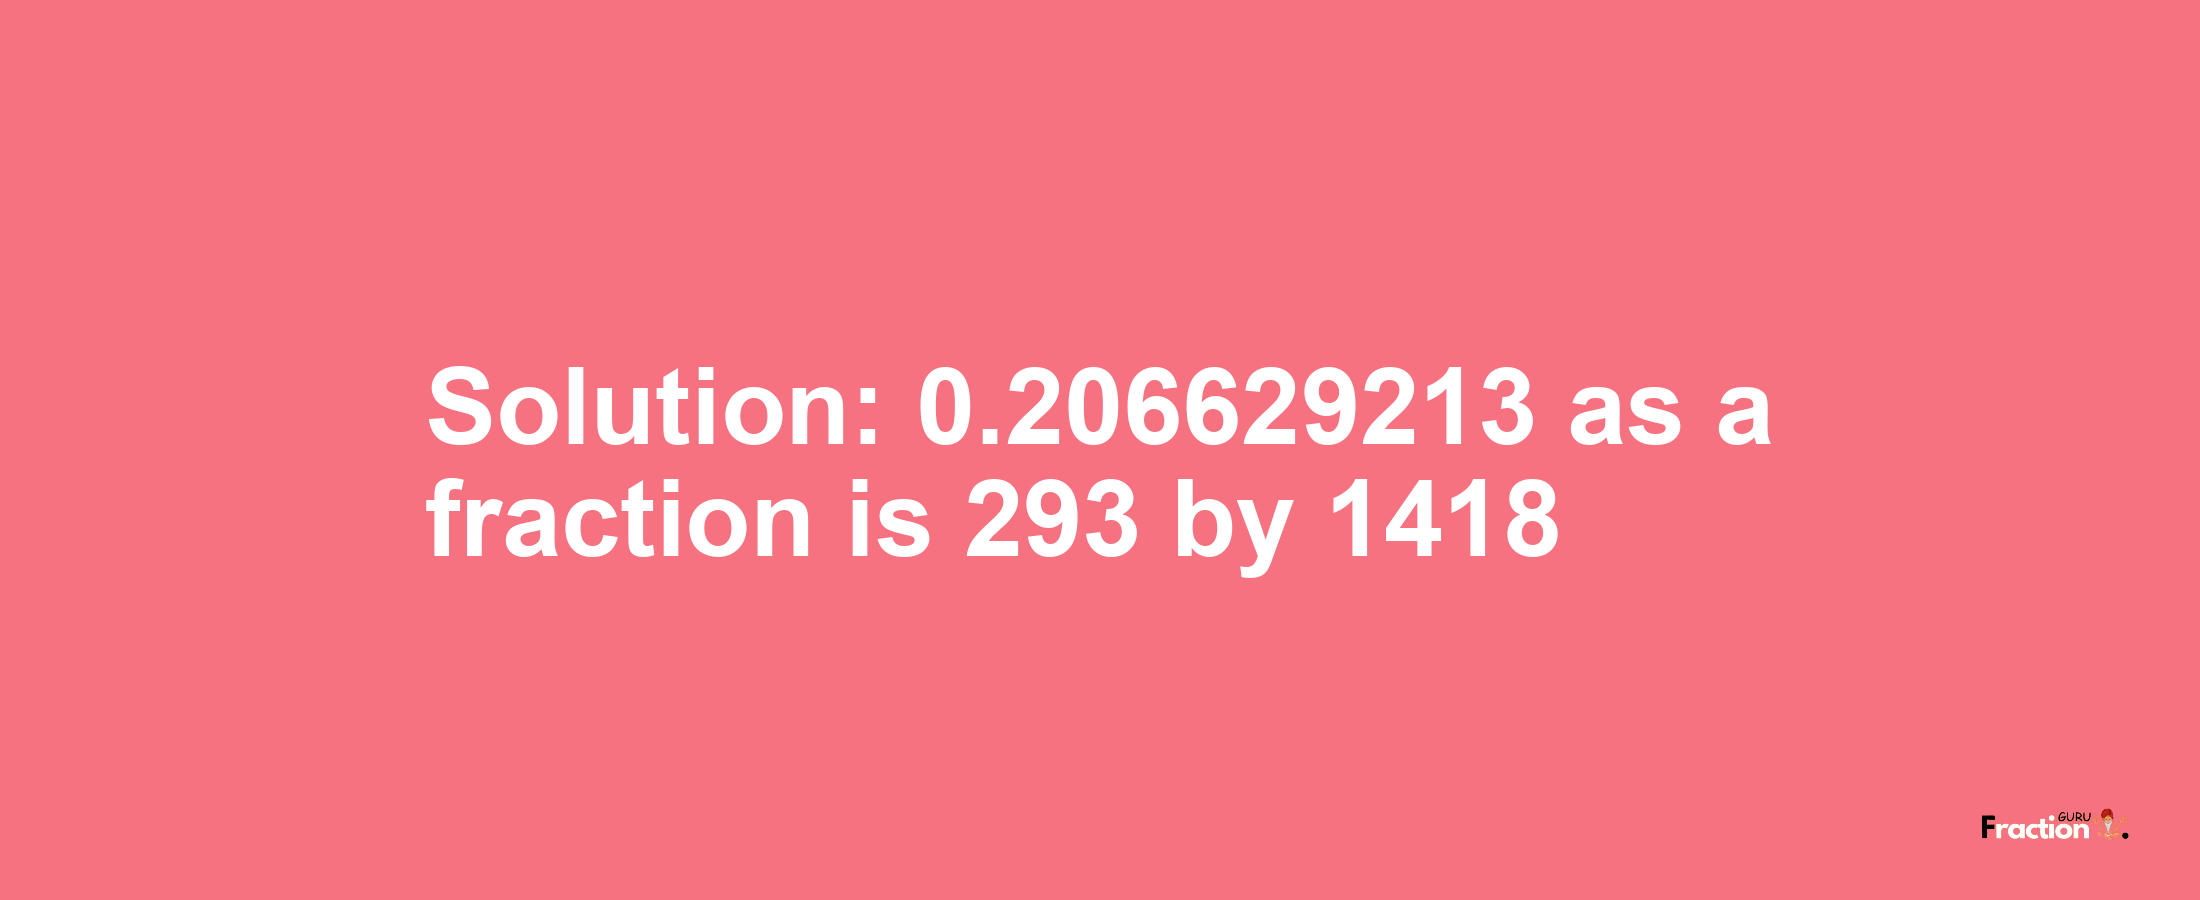 Solution:0.206629213 as a fraction is 293/1418